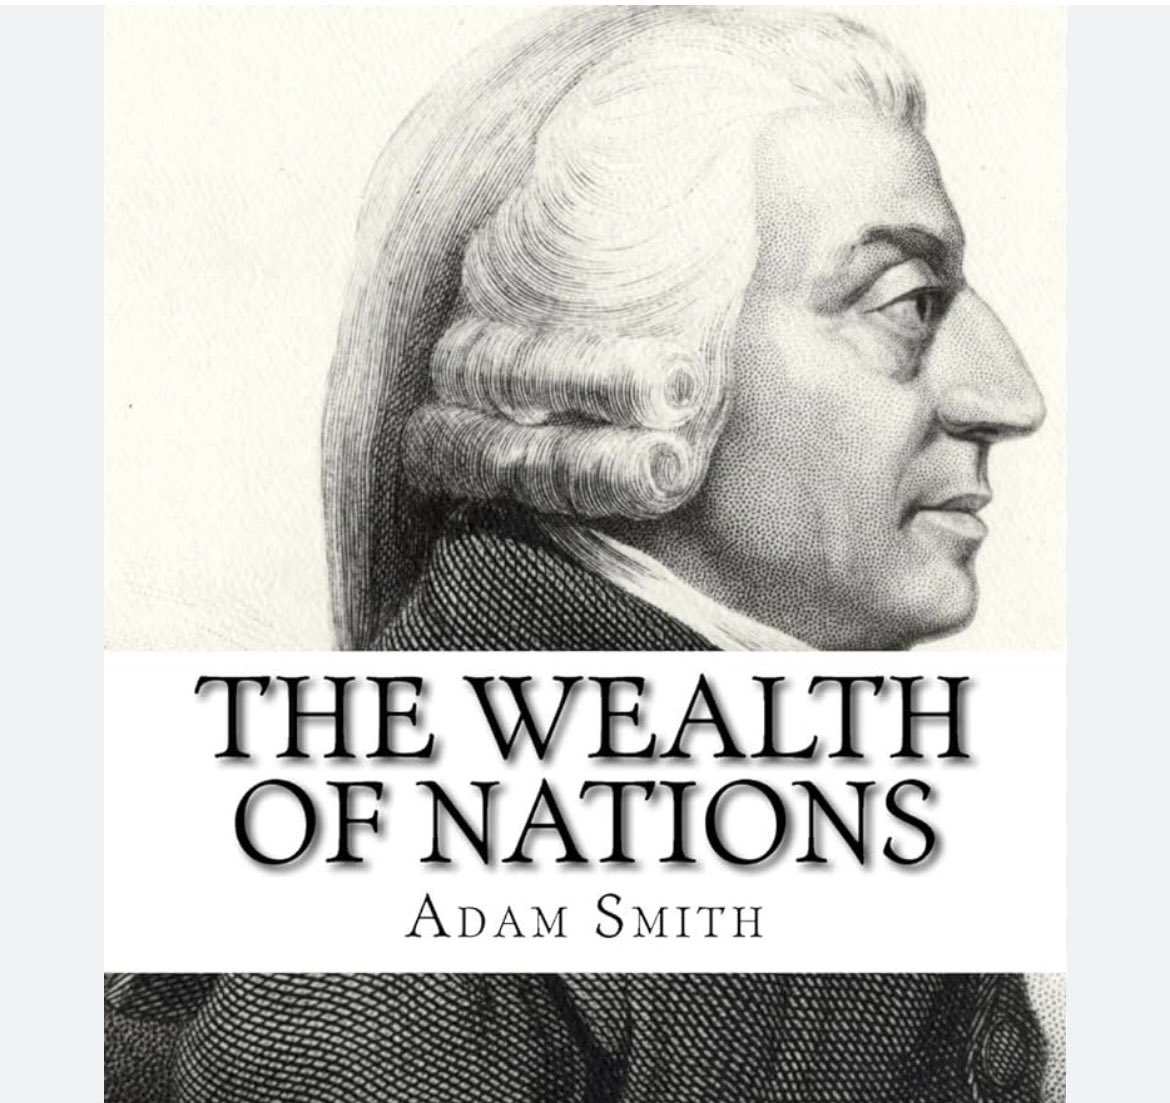 If you’re interested in Capitalist economics. The original classical liberal of economy is Adam Smith. The Wealth of Nations

Quintessentially anti-Marx

#AdamSmith  #WealthOfNations #Capitalism #AntiMarx #FuckMarx #BoundForTheGulag
#MarketEconomy #PlannedEconomy #AntiCommunism